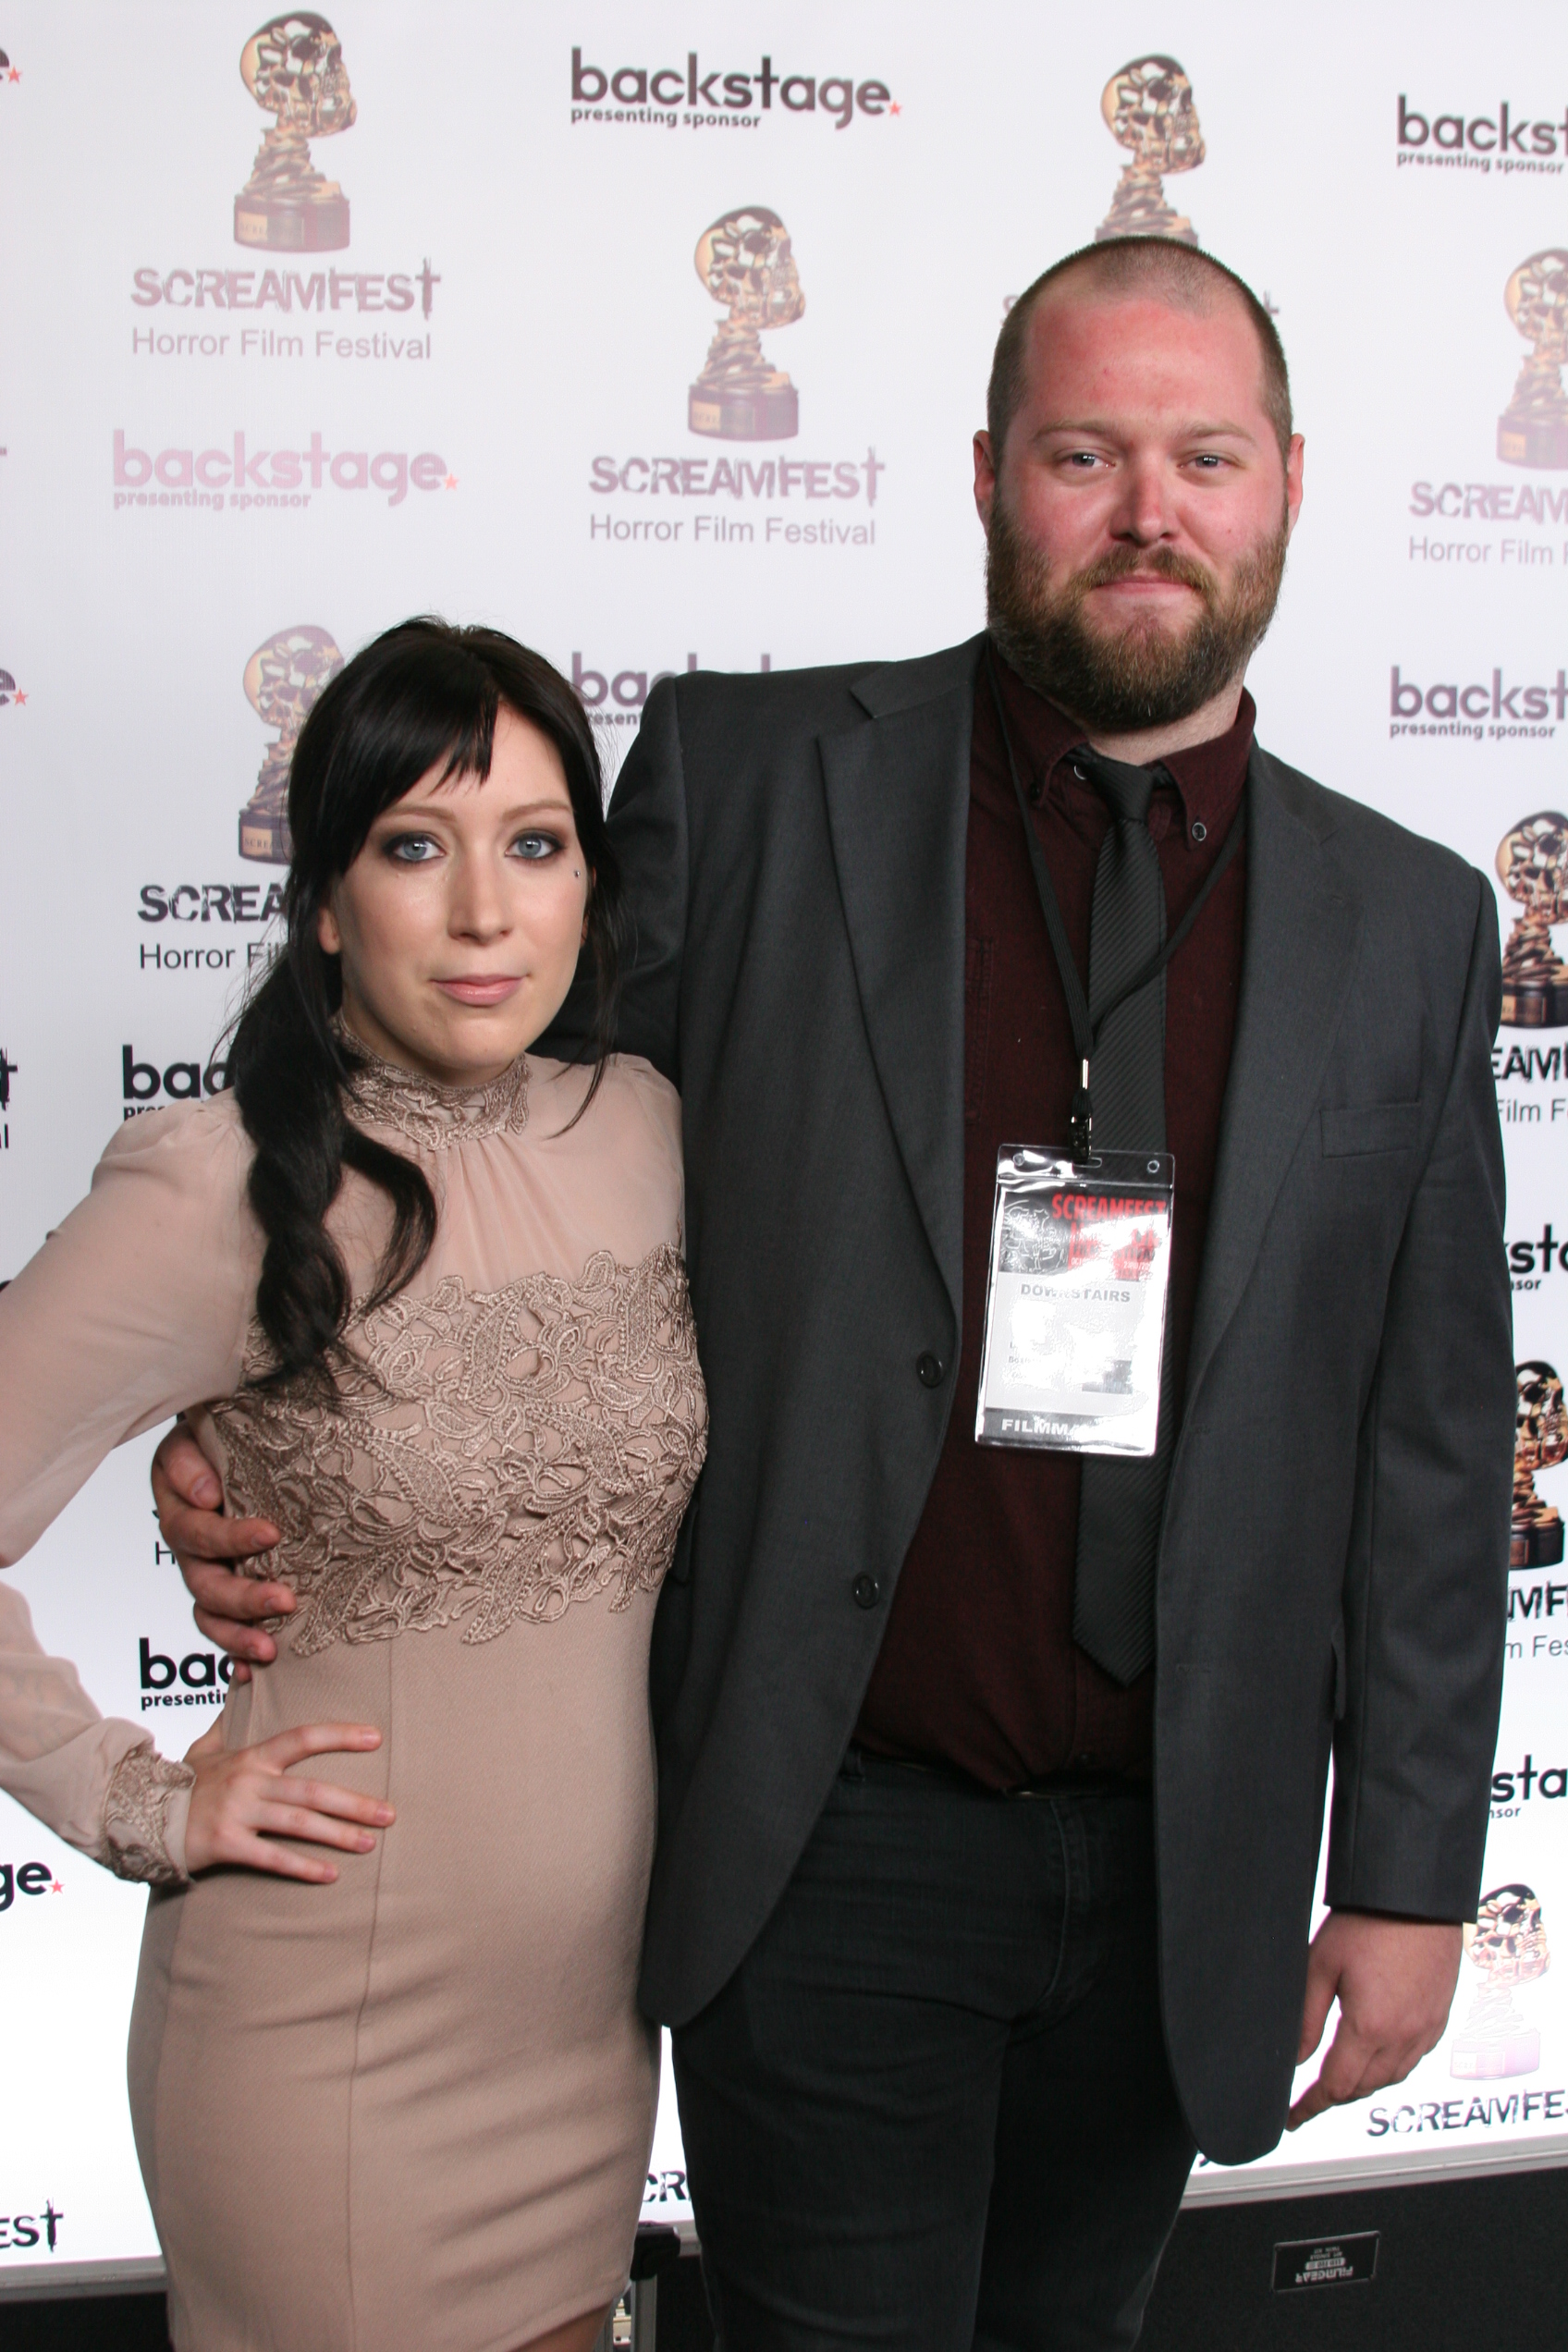 Lee Boxleitner and his fiance, Charlotte Waters